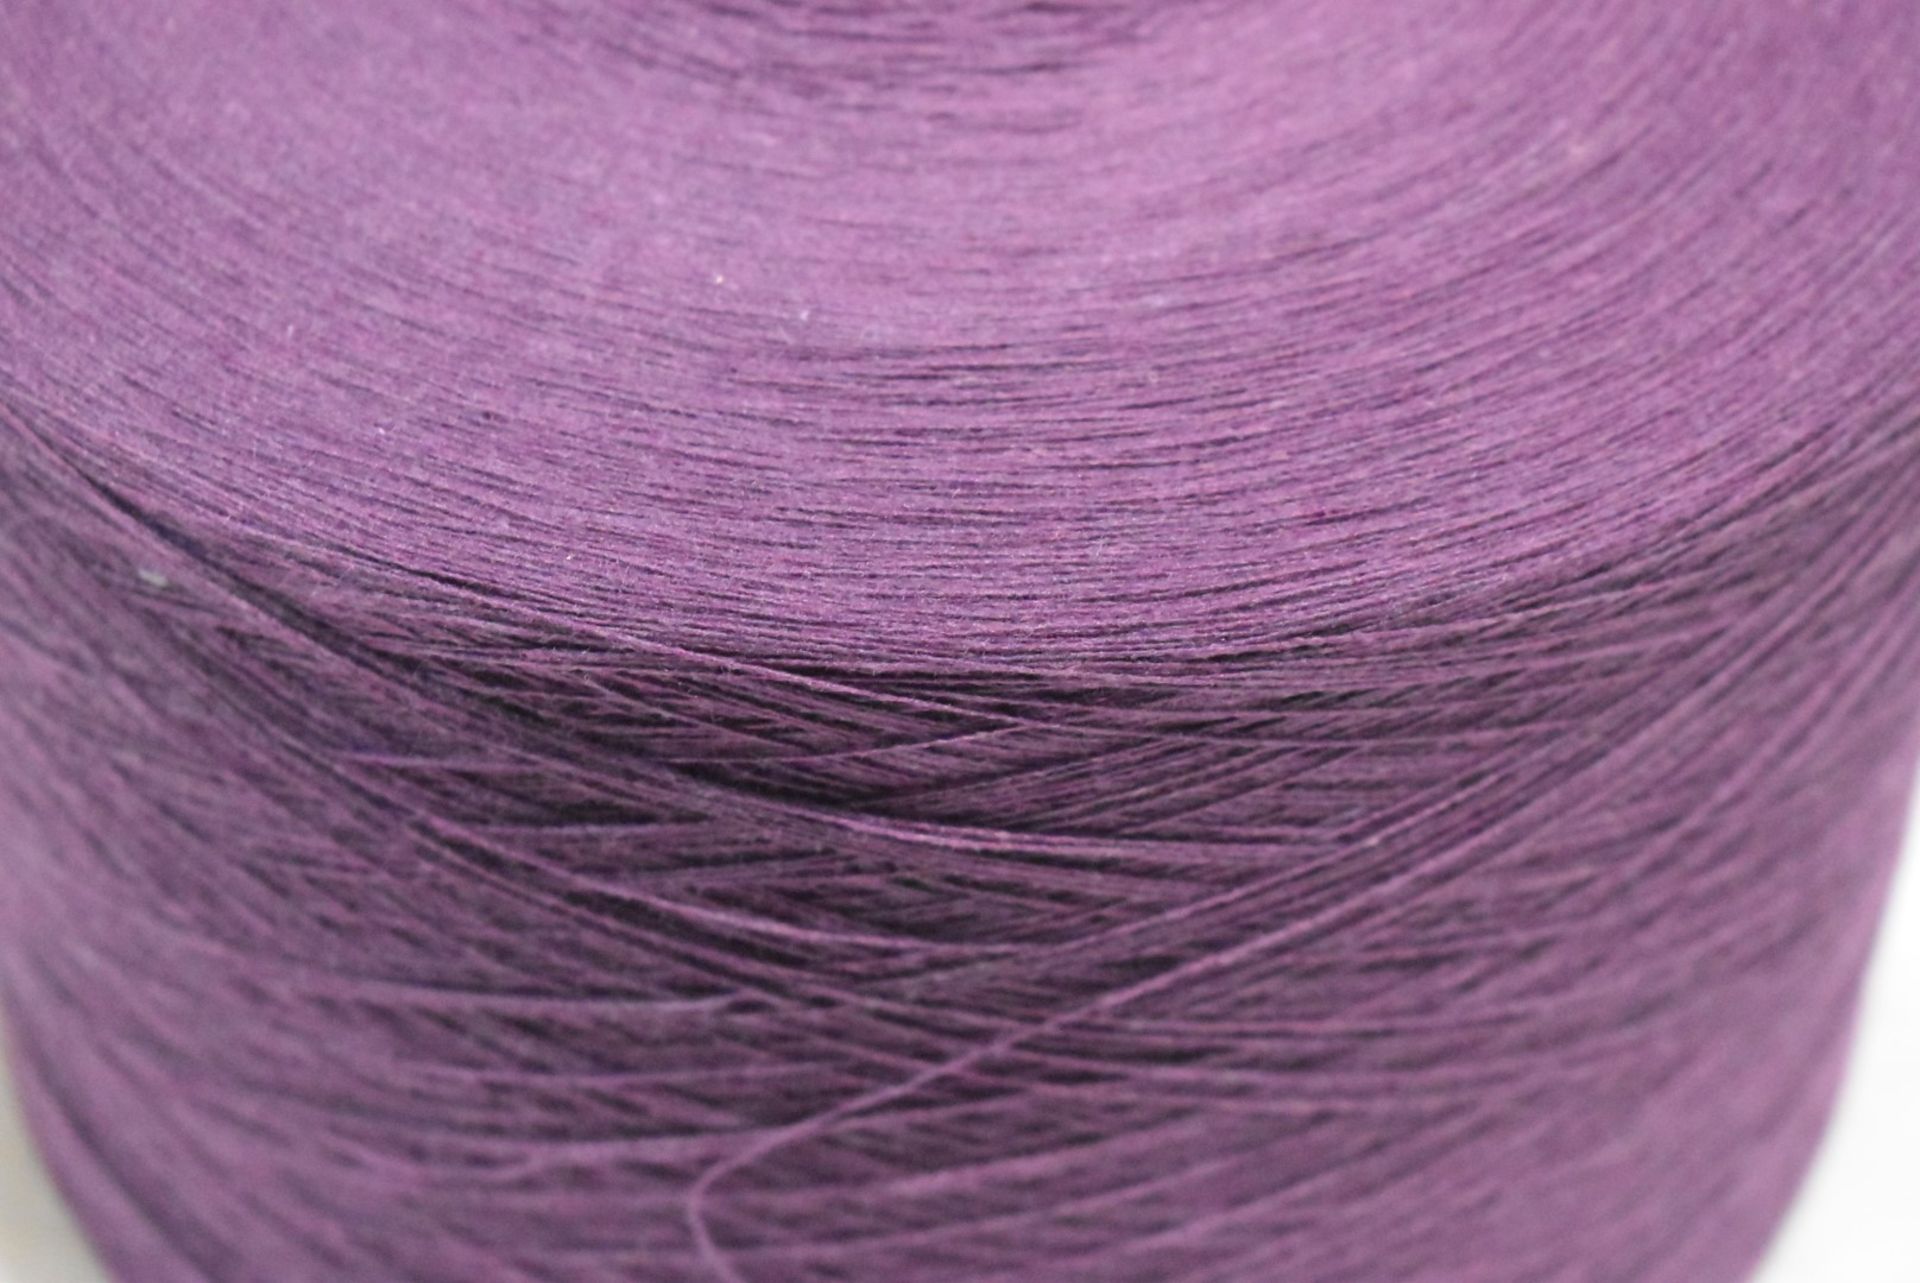 12 x Cones of 1/13 MicroCotton Knitting Yarn - Purple - Approx Weight: 2,300g - New Stock ABL Yarn - Image 7 of 15